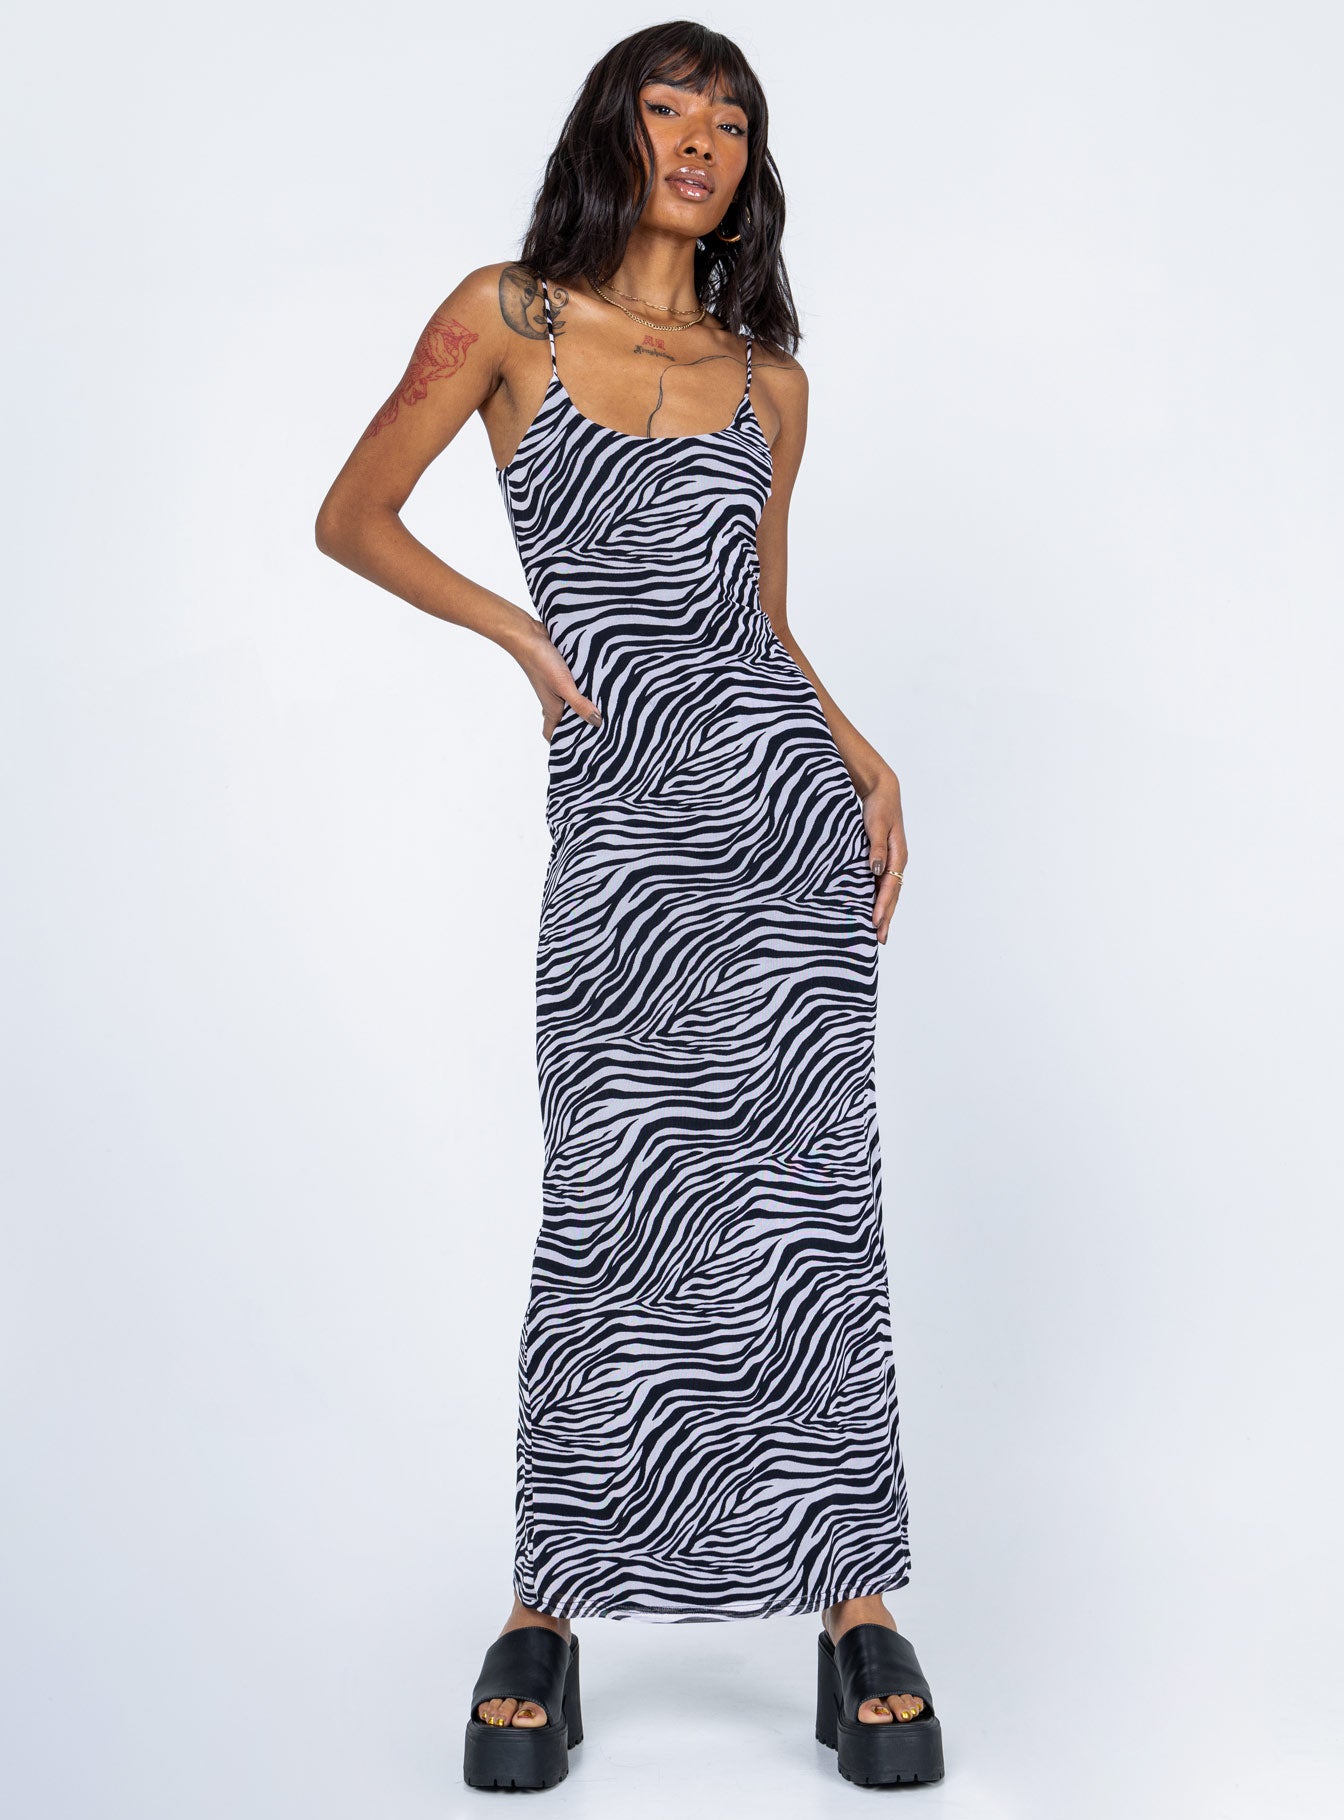 Plus-Size Zebra Print Dresses Shopping Guide | $250 and Under